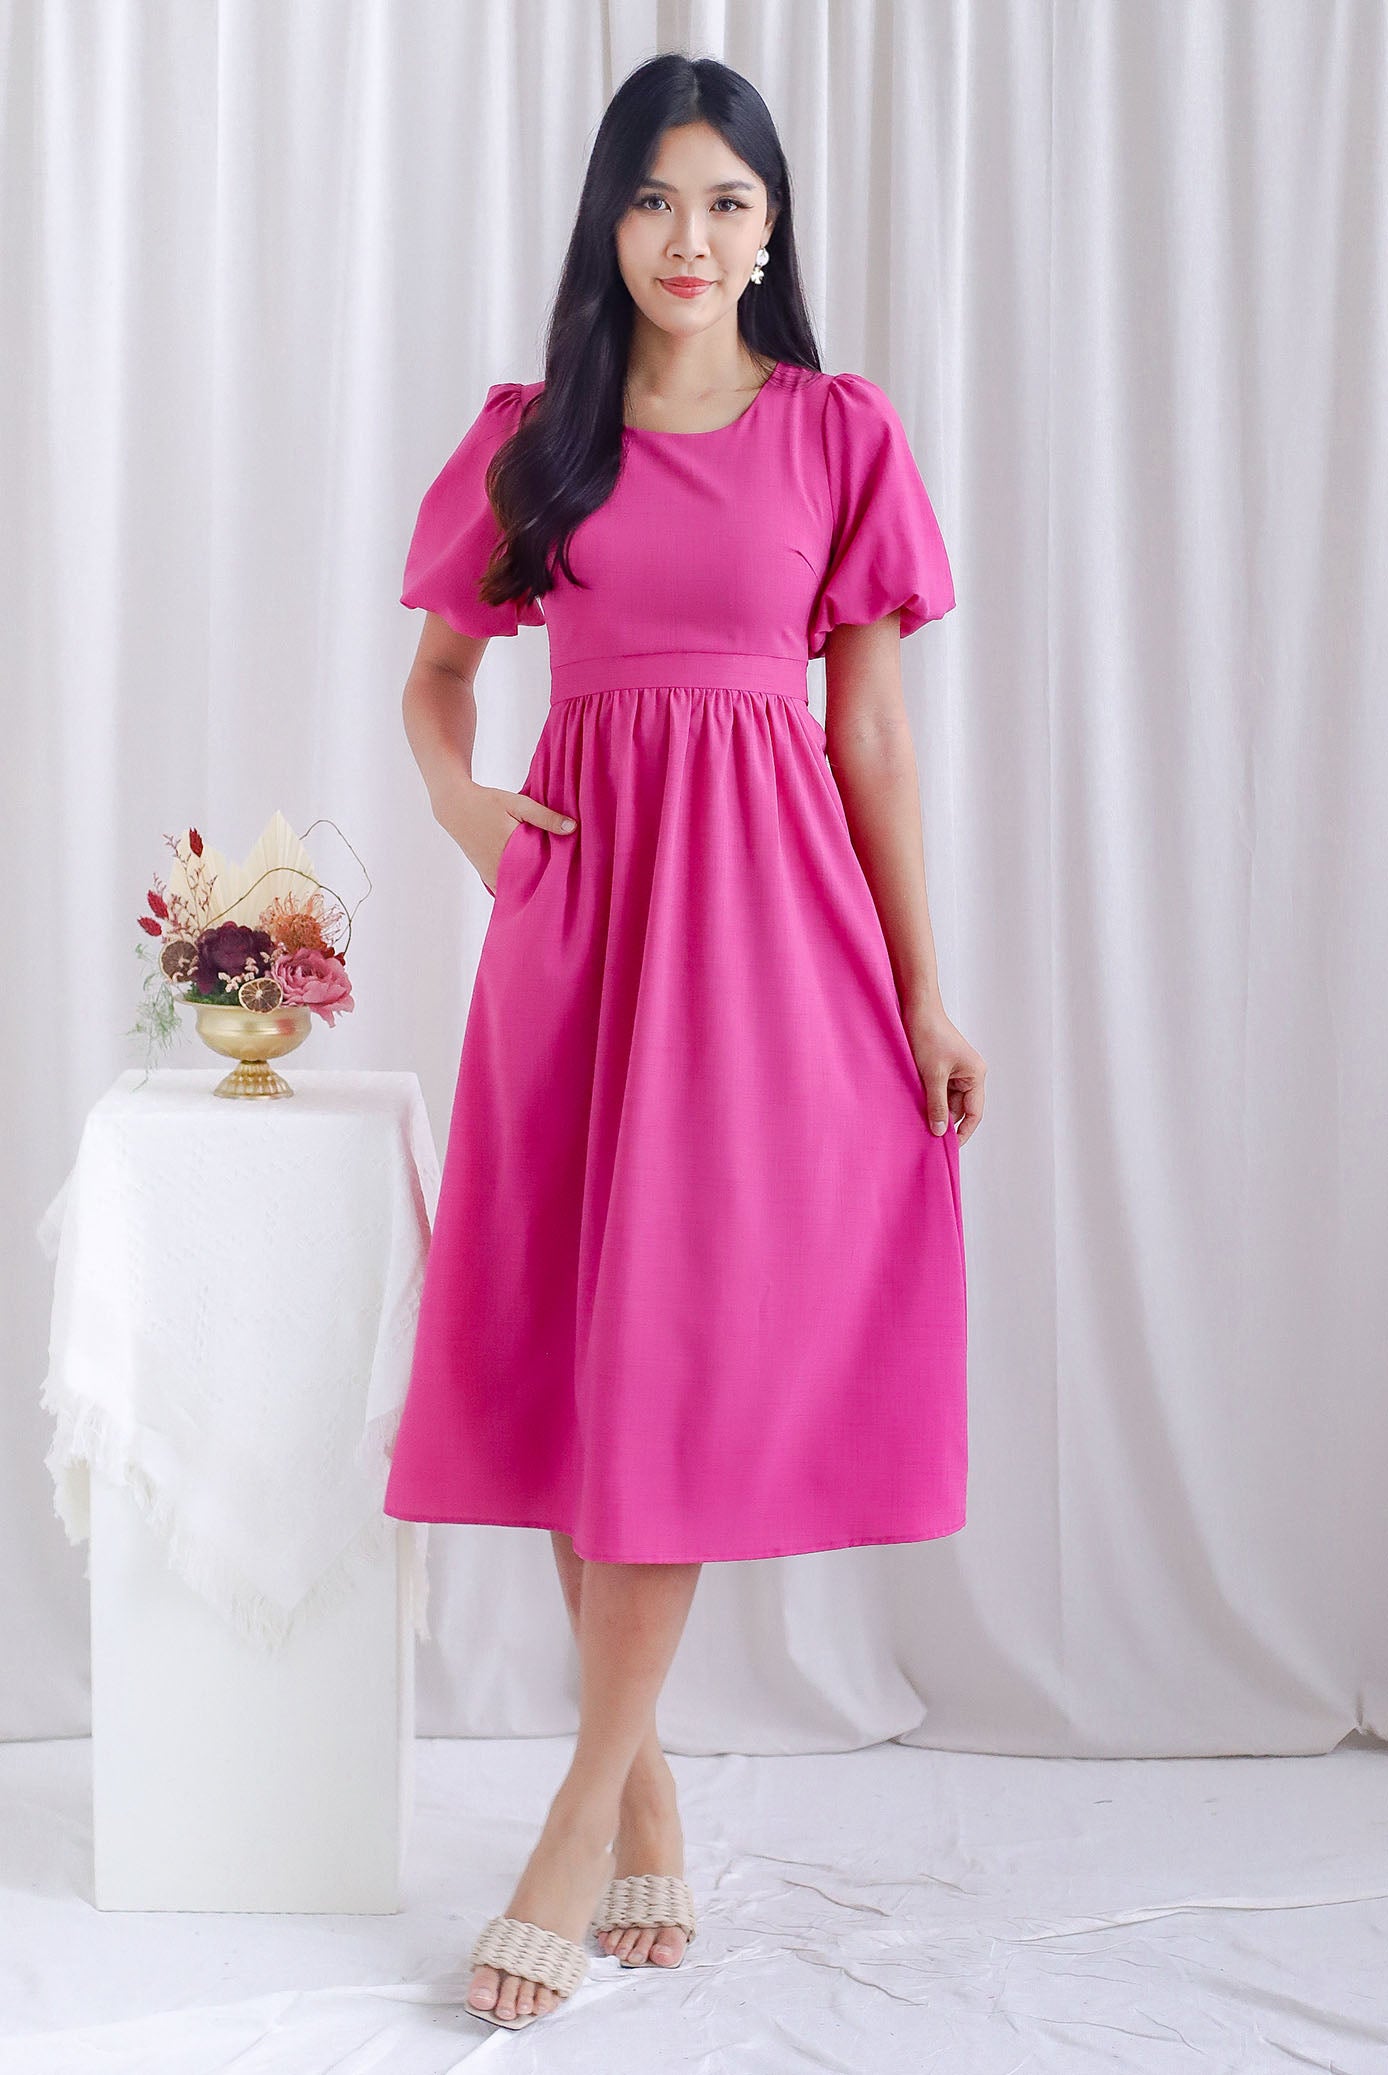 Danica Cut Out Tie Back Midi Sleeved Dress In Hot Pink